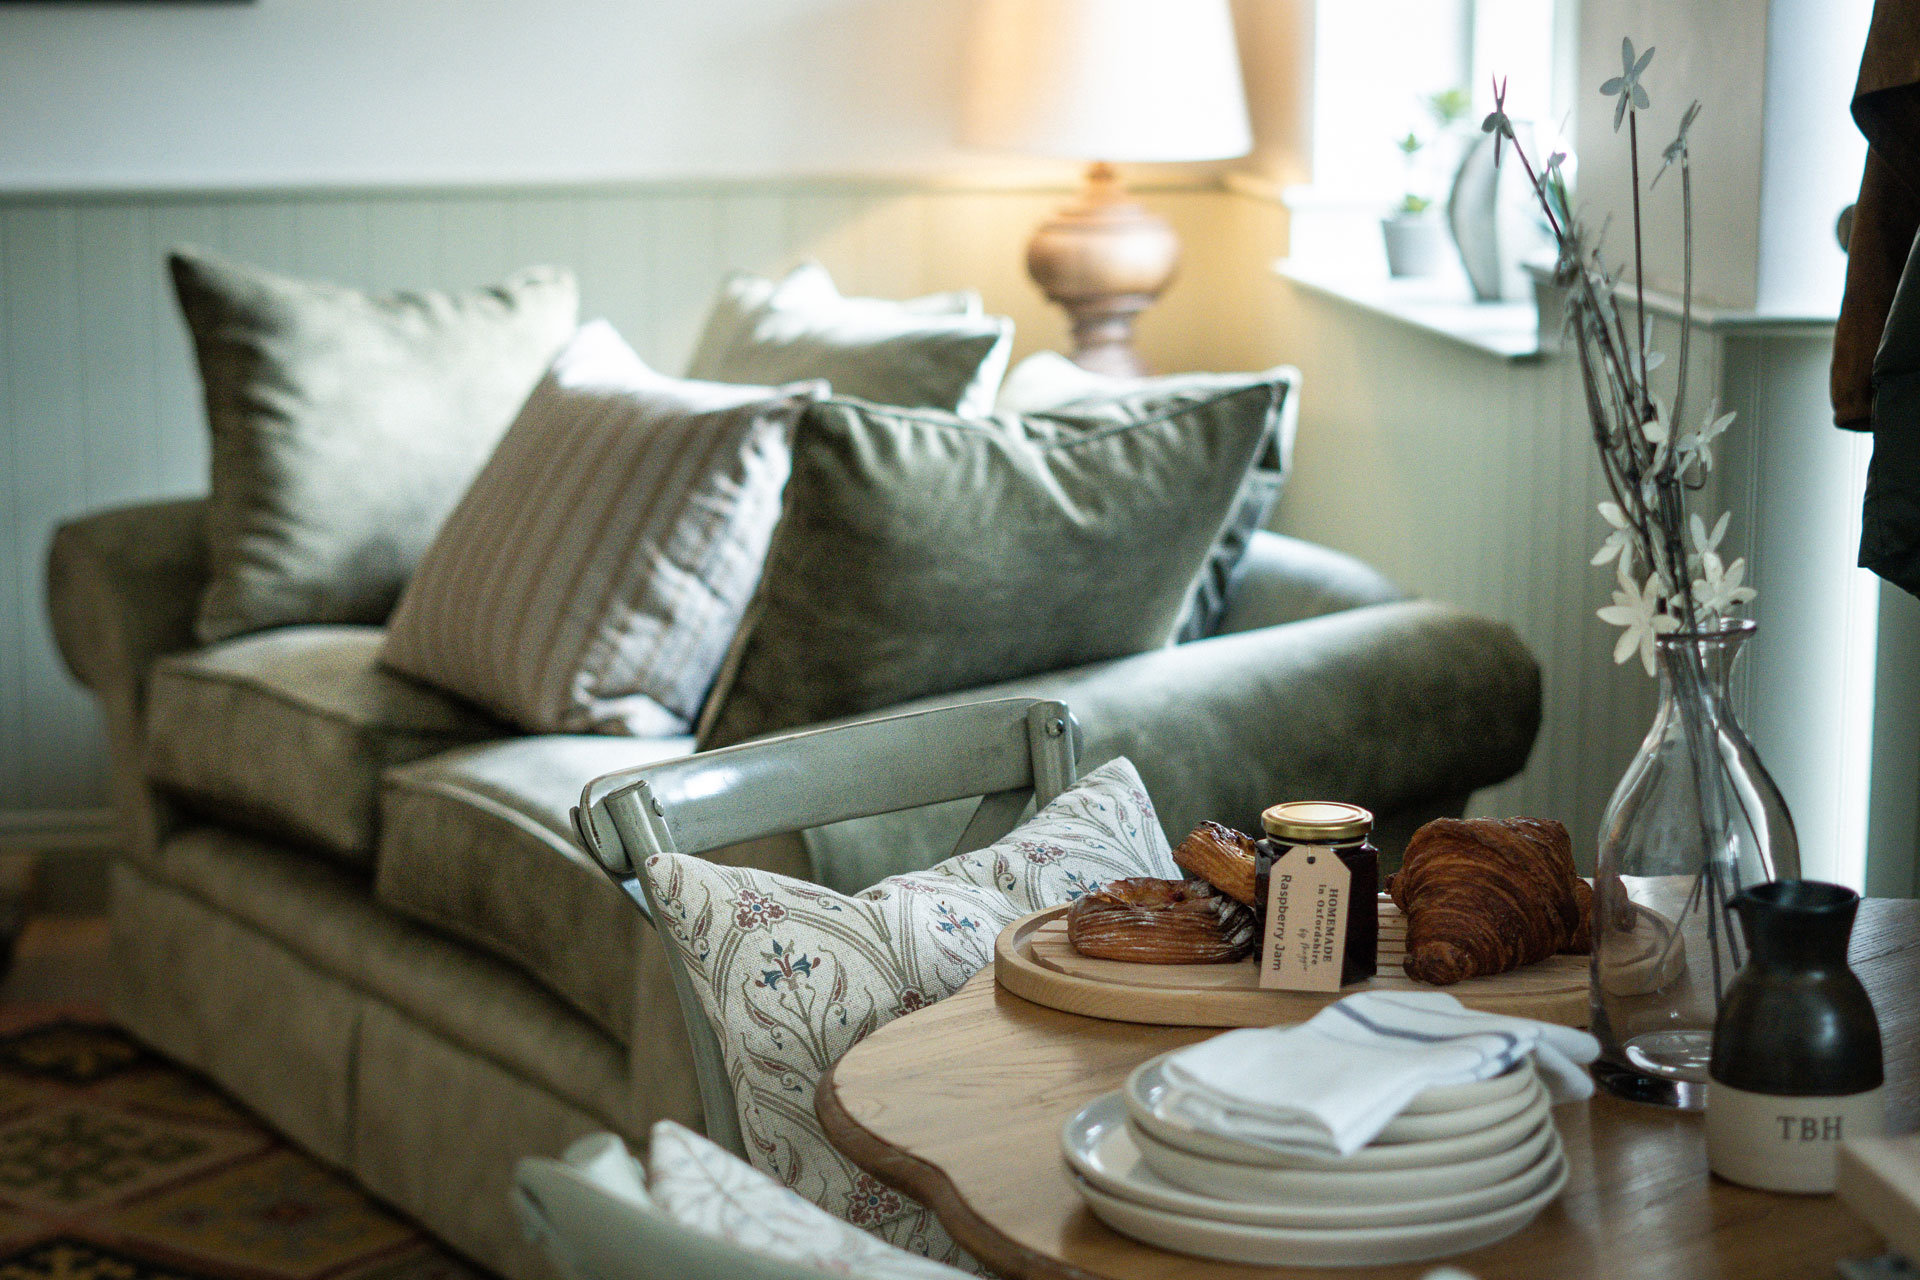 Cottage living room with grey sofa and fresh pastries on the table beside.